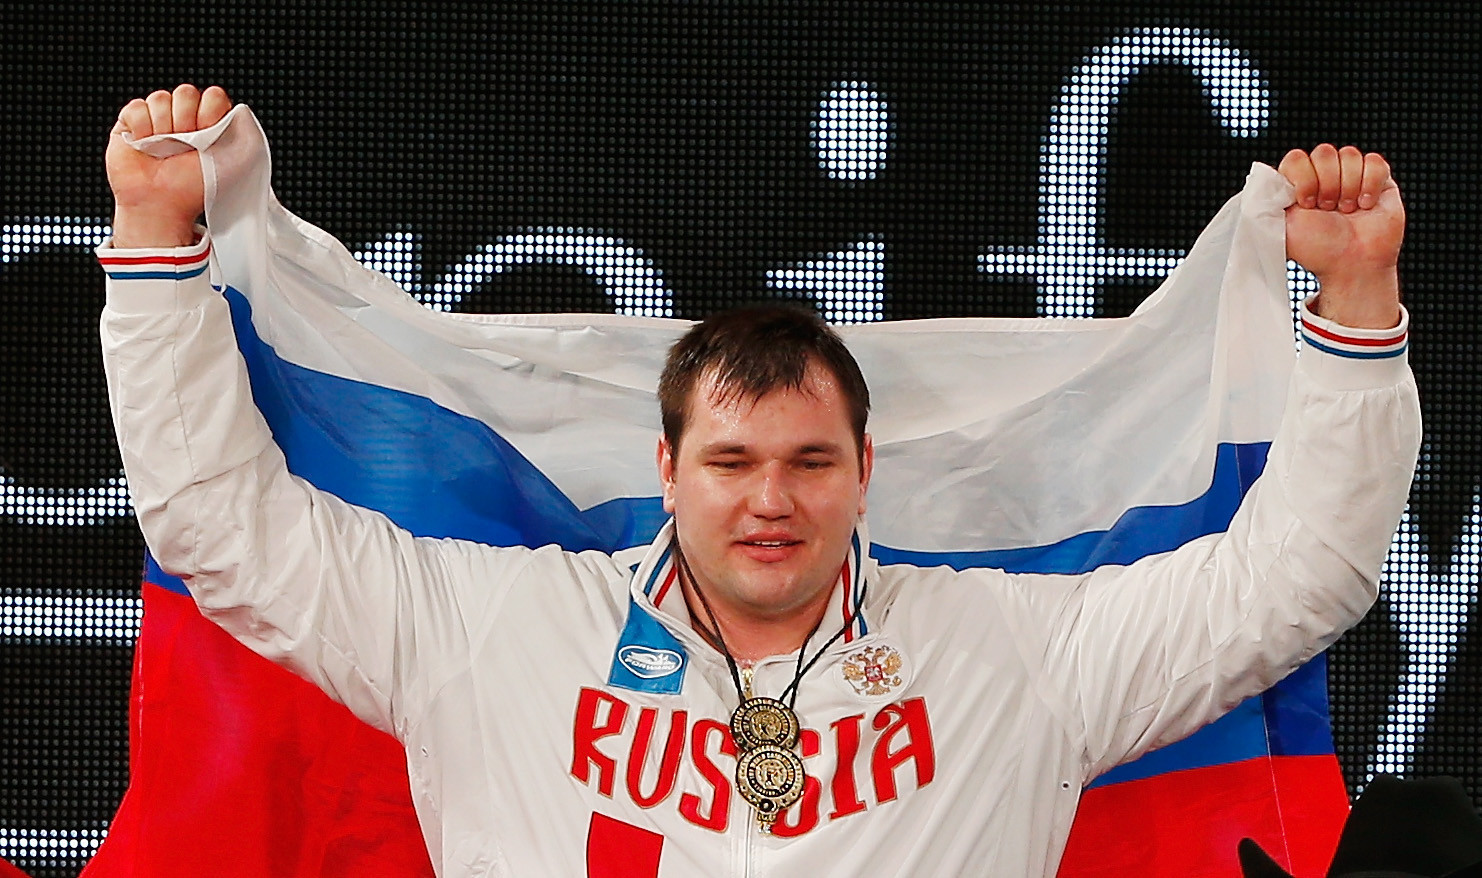 Russia's Lovchev earns place at European Championships upon return from doping ban